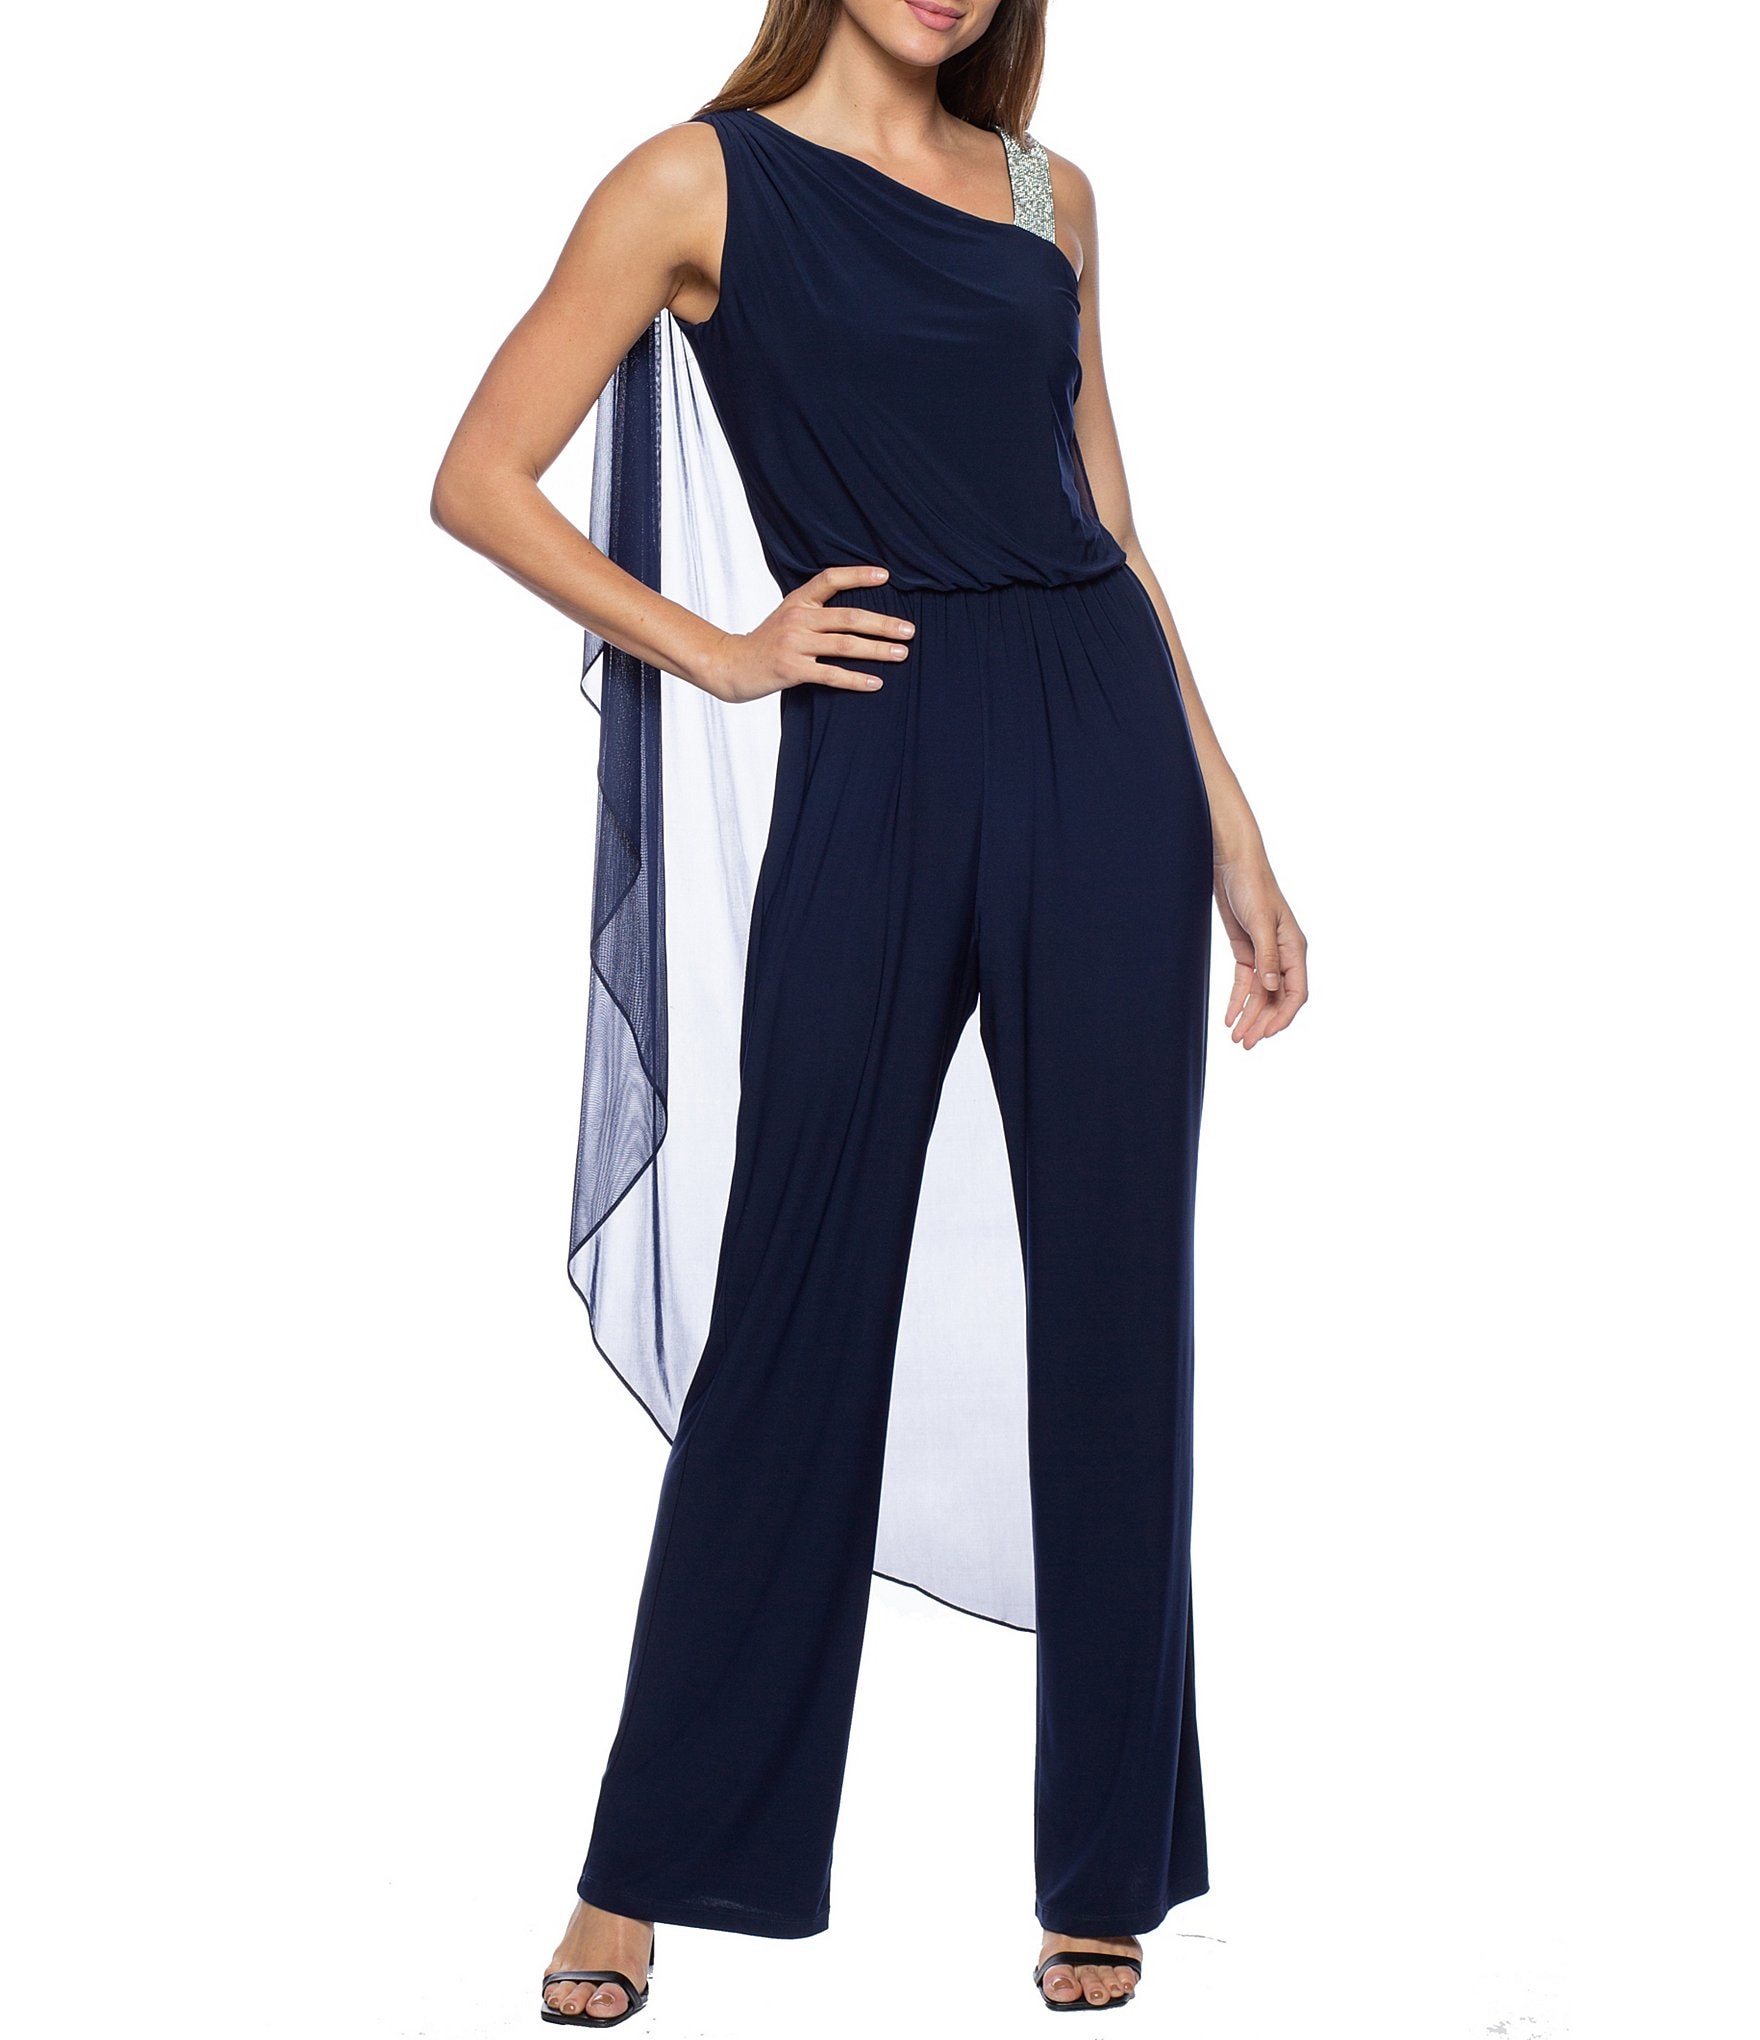 Navy Blue One Shoulder Formal Jumpsuit Evening Wear With Long Sleeves Saudi  Arabia Formal Jumpsuit For Prom, Plus Size Women A Line Pant Suit PA250M  From Huhu6, $121.41 | DHgate.Com